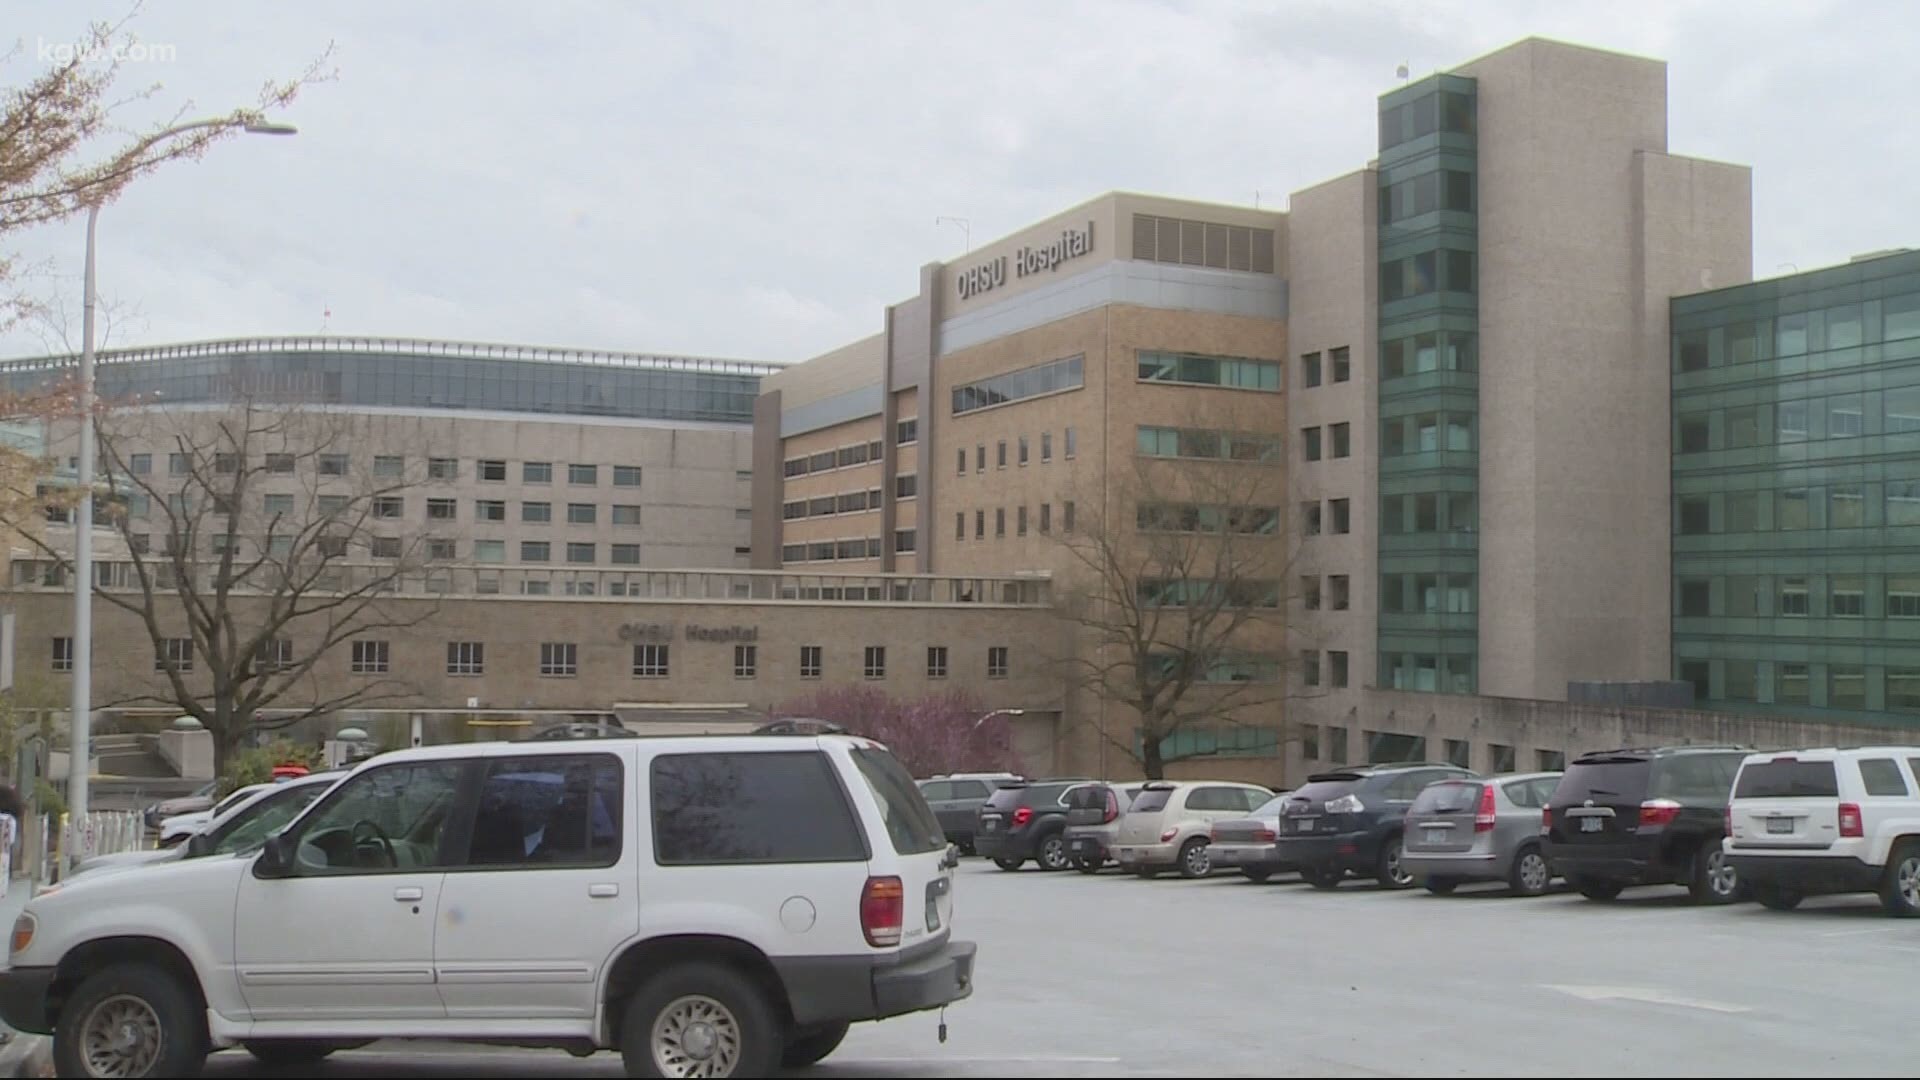 Hospital workers feel they are more prepared for a COVID-19 surge this fall. Morgan Romero reports.